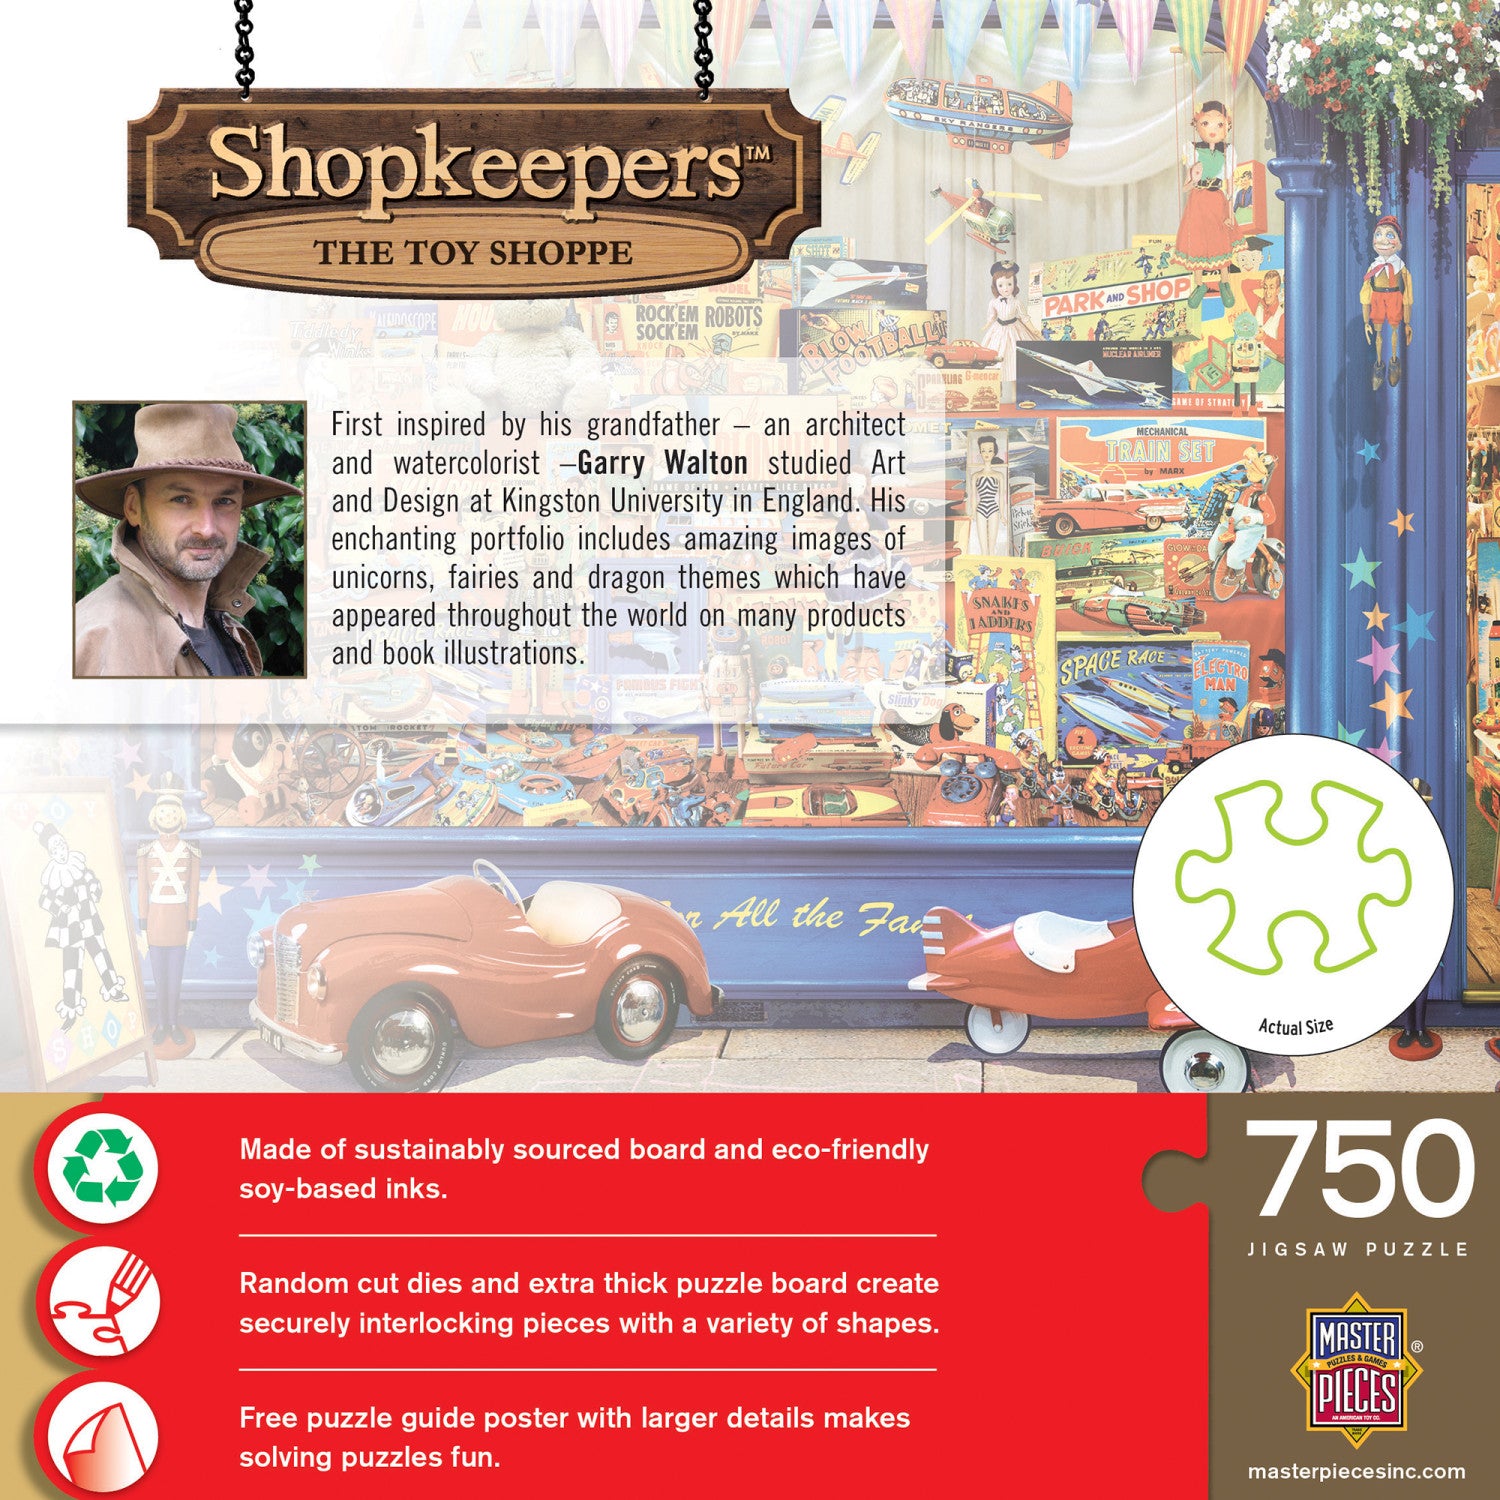 Shopkeepers - The Toy Shoppe 750 Piece Jigsaw Puzzle